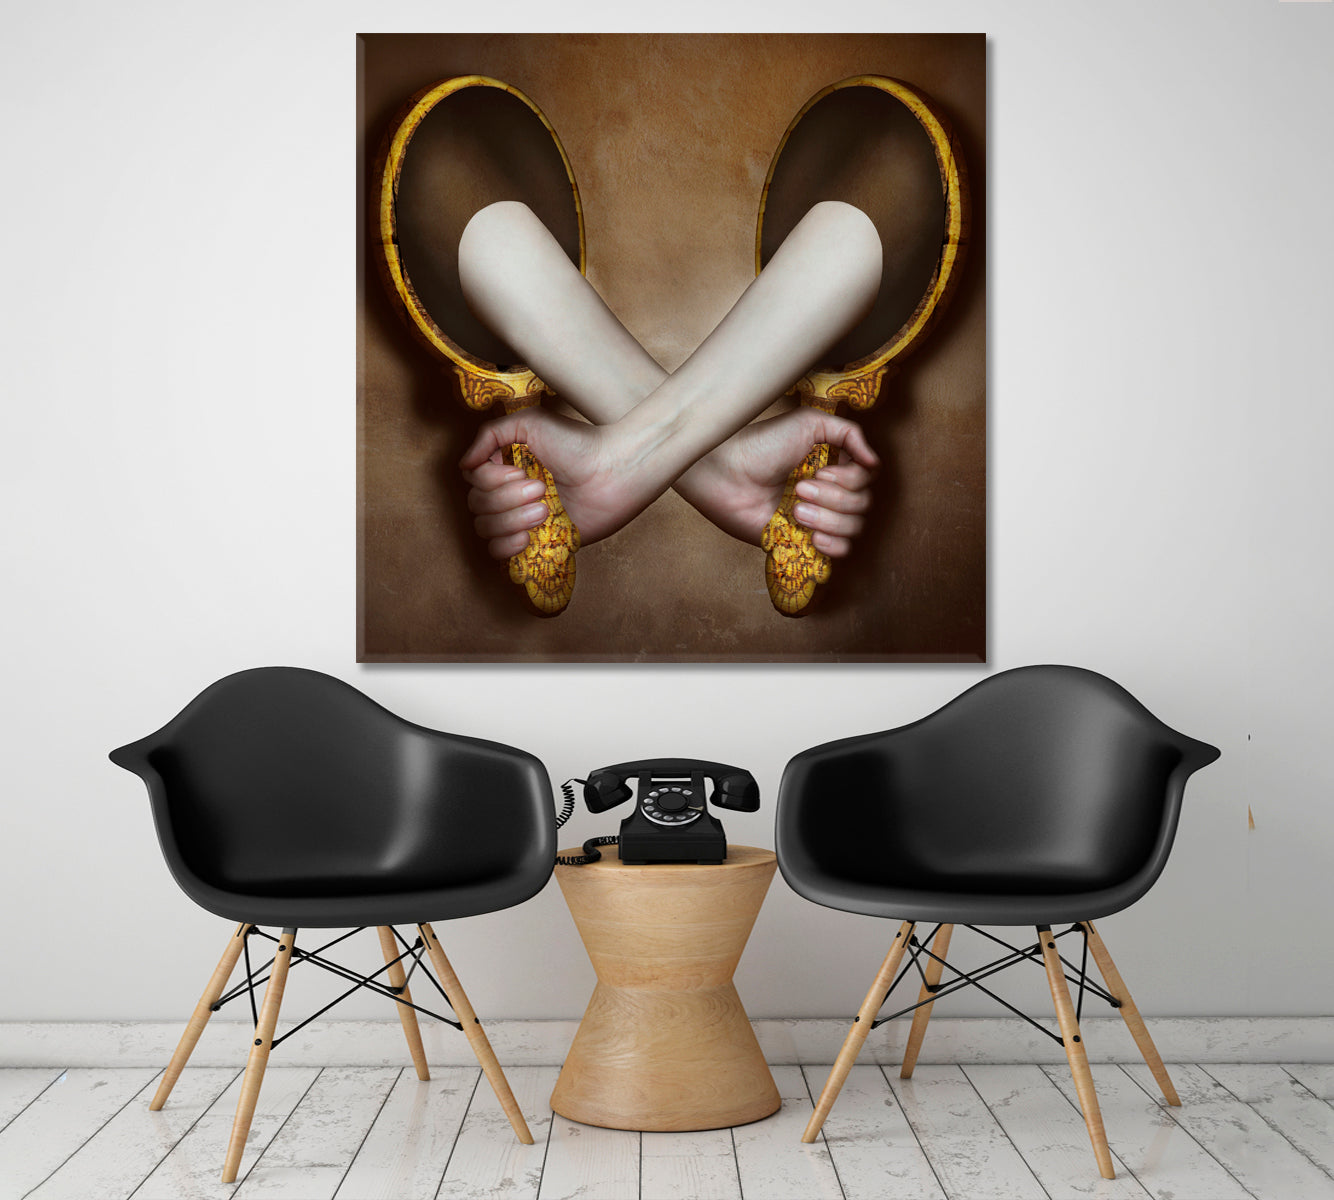 Two Hands Support Each Other Conceptual Modern Art Contemporary Art Artesty 1 Panel 12"x12" 